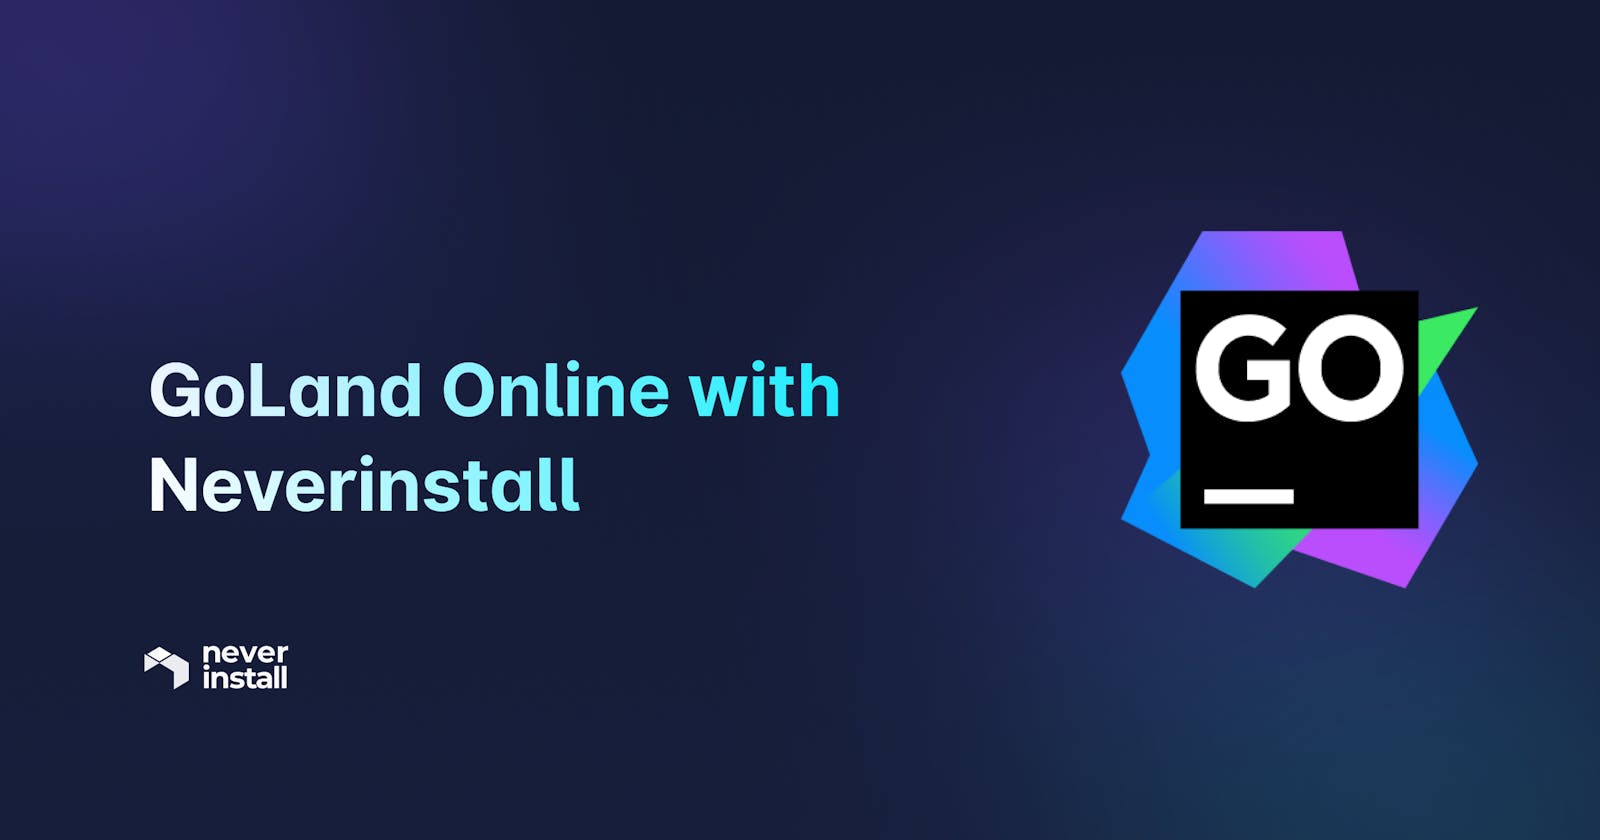 GoLand Online with Neverinstall